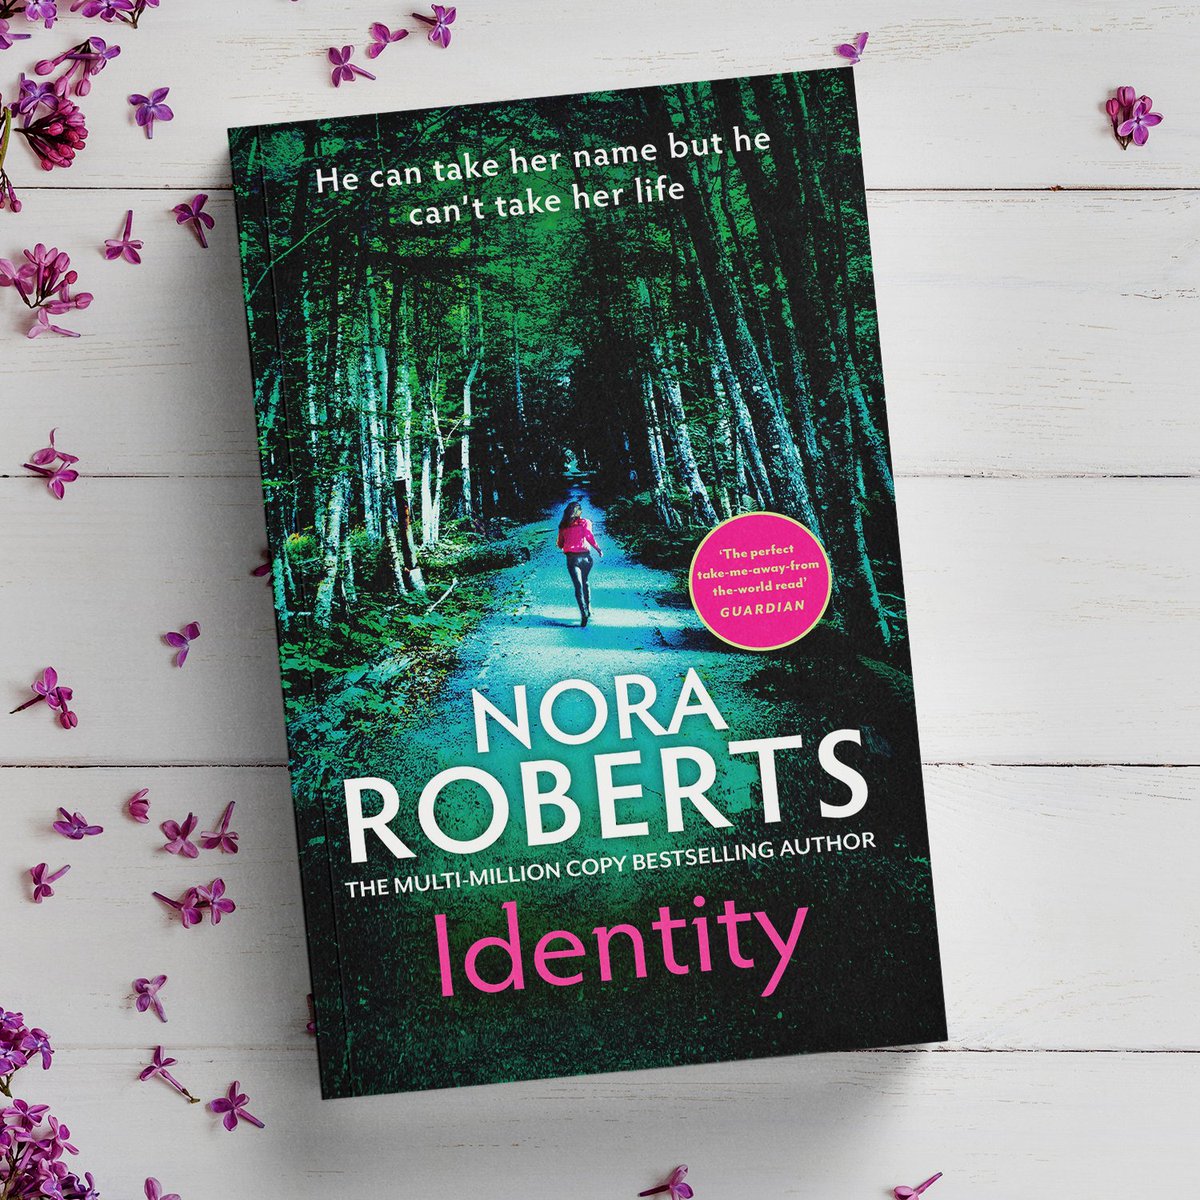 Out in paperback today!

'With murder and identity theft at its pounding heart, this edge-of-your-seat page-turner is packed with suspense, romance and fresh-start resilience.' @JoanneOwen Expert Reviewer

Identity by Nora Roberts @PiatkusBooks

Order now:
l8r.it/TzUt